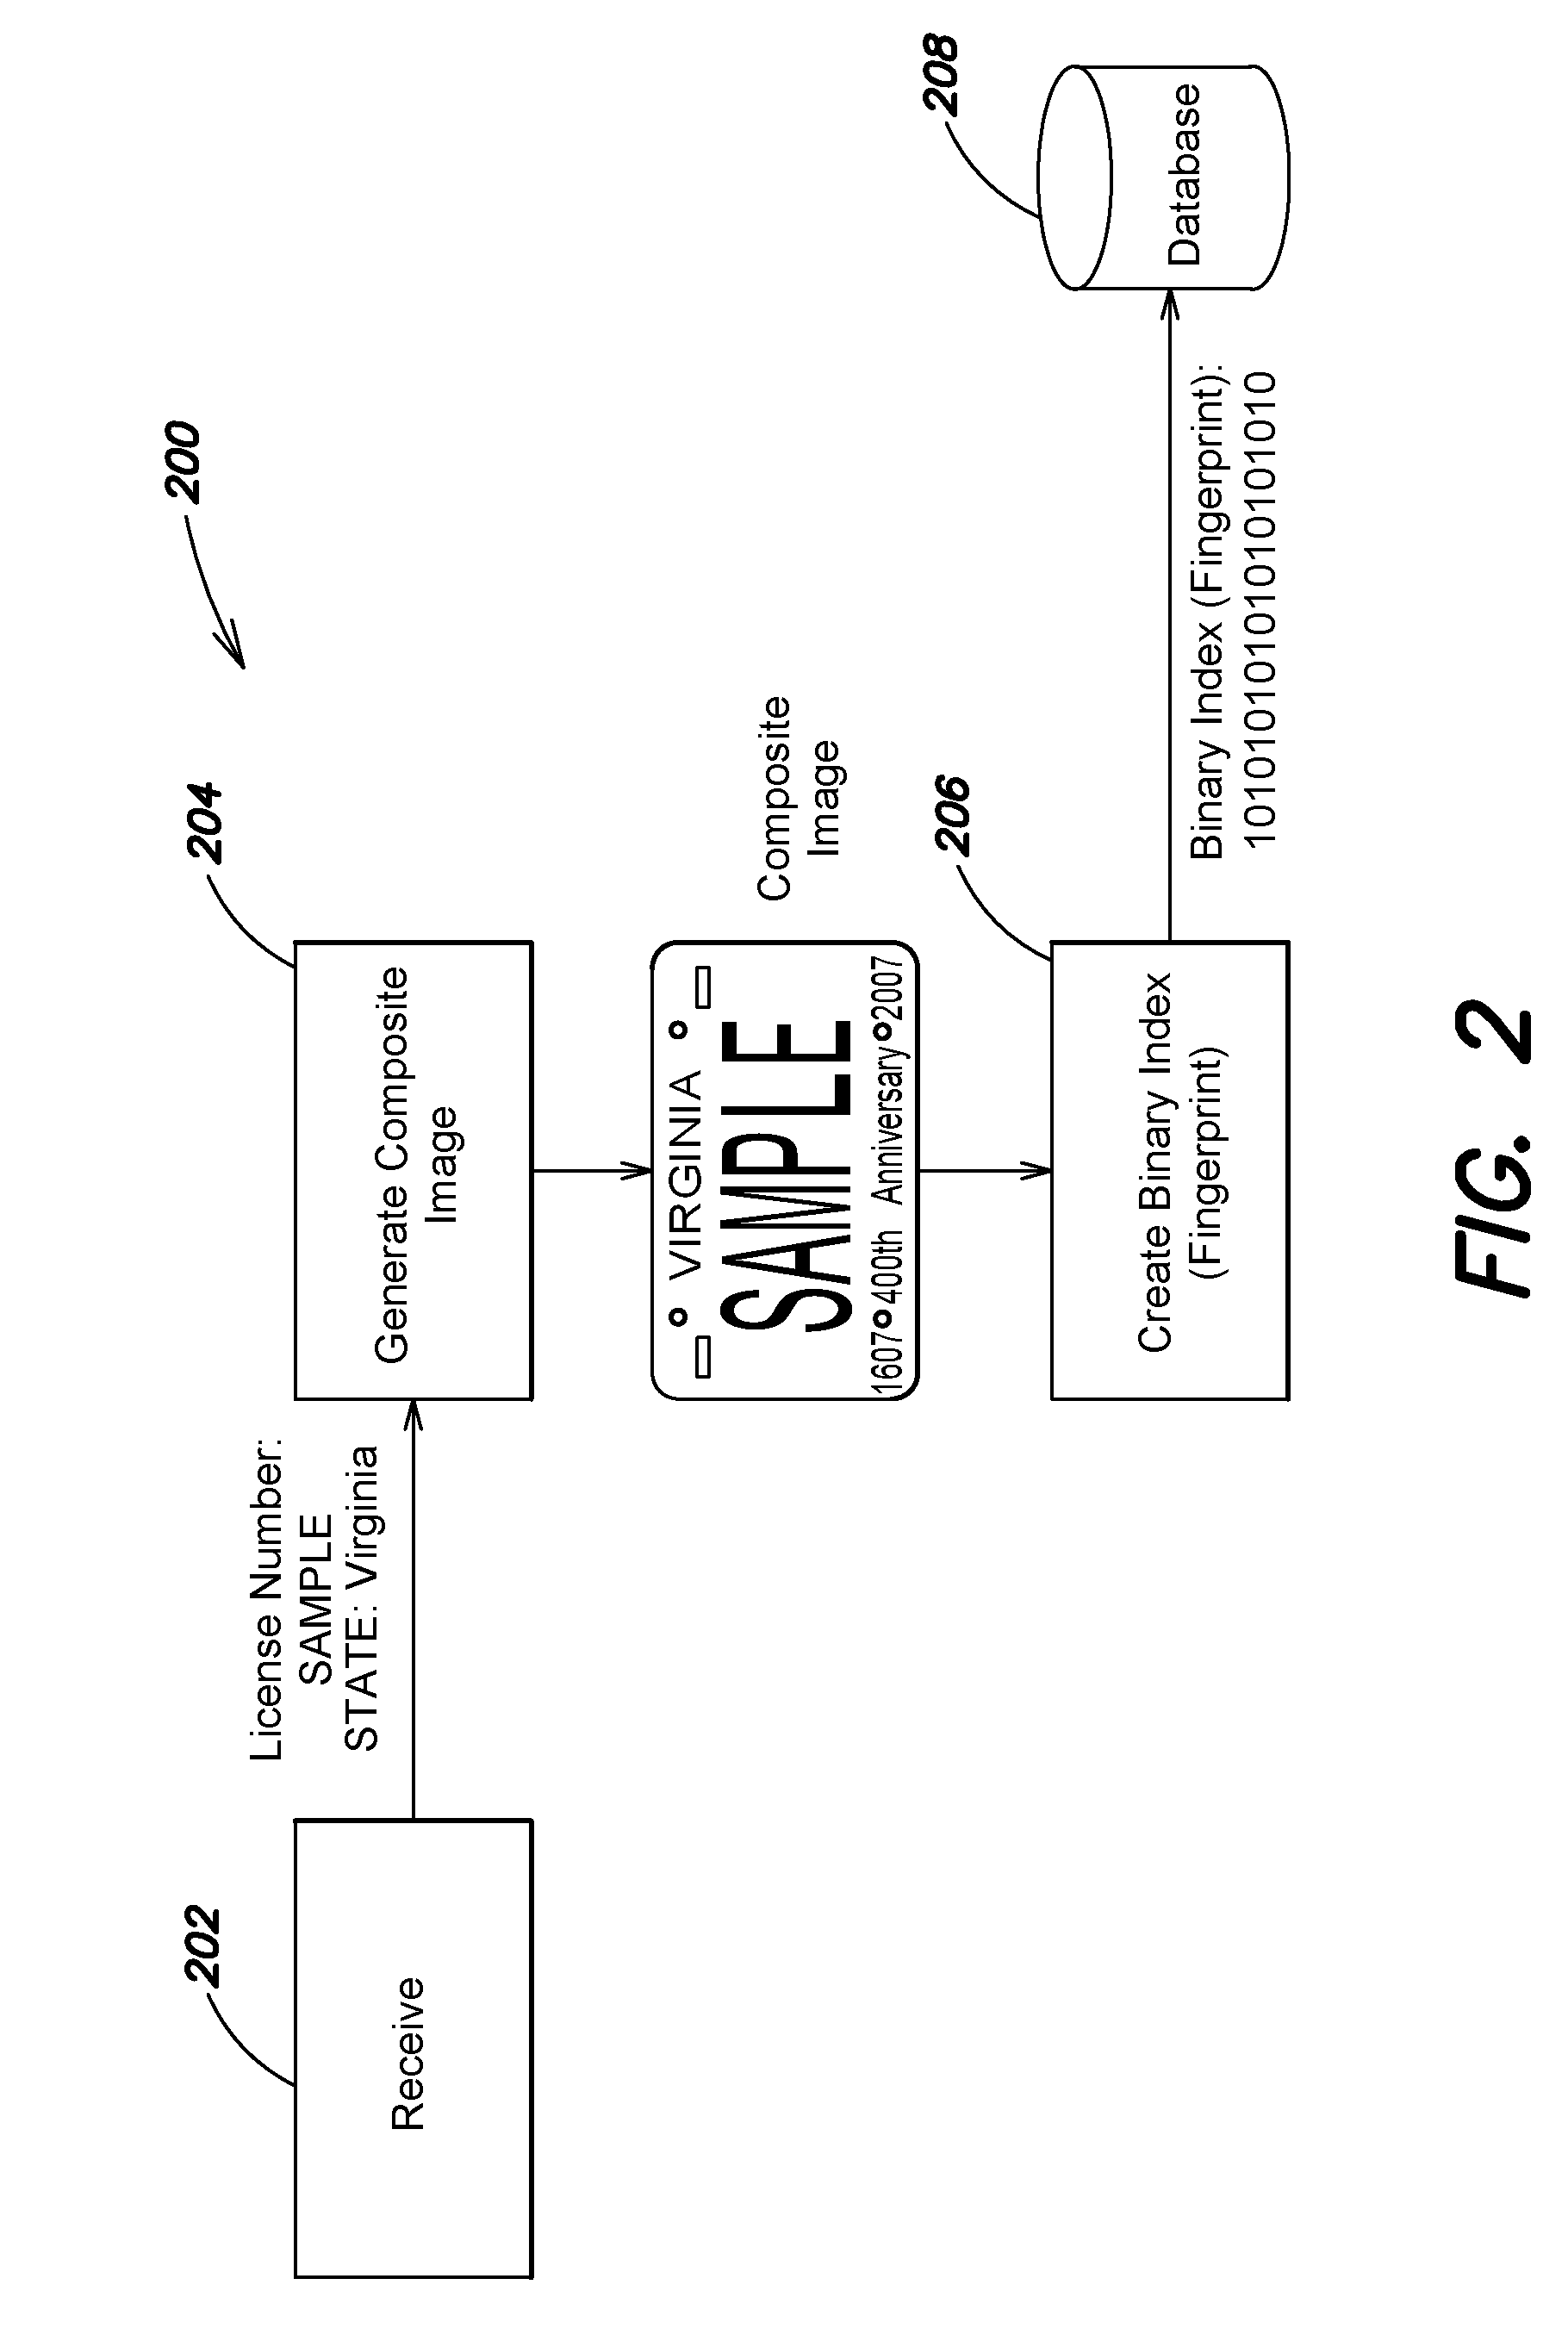 License plate distributed review systems and methods